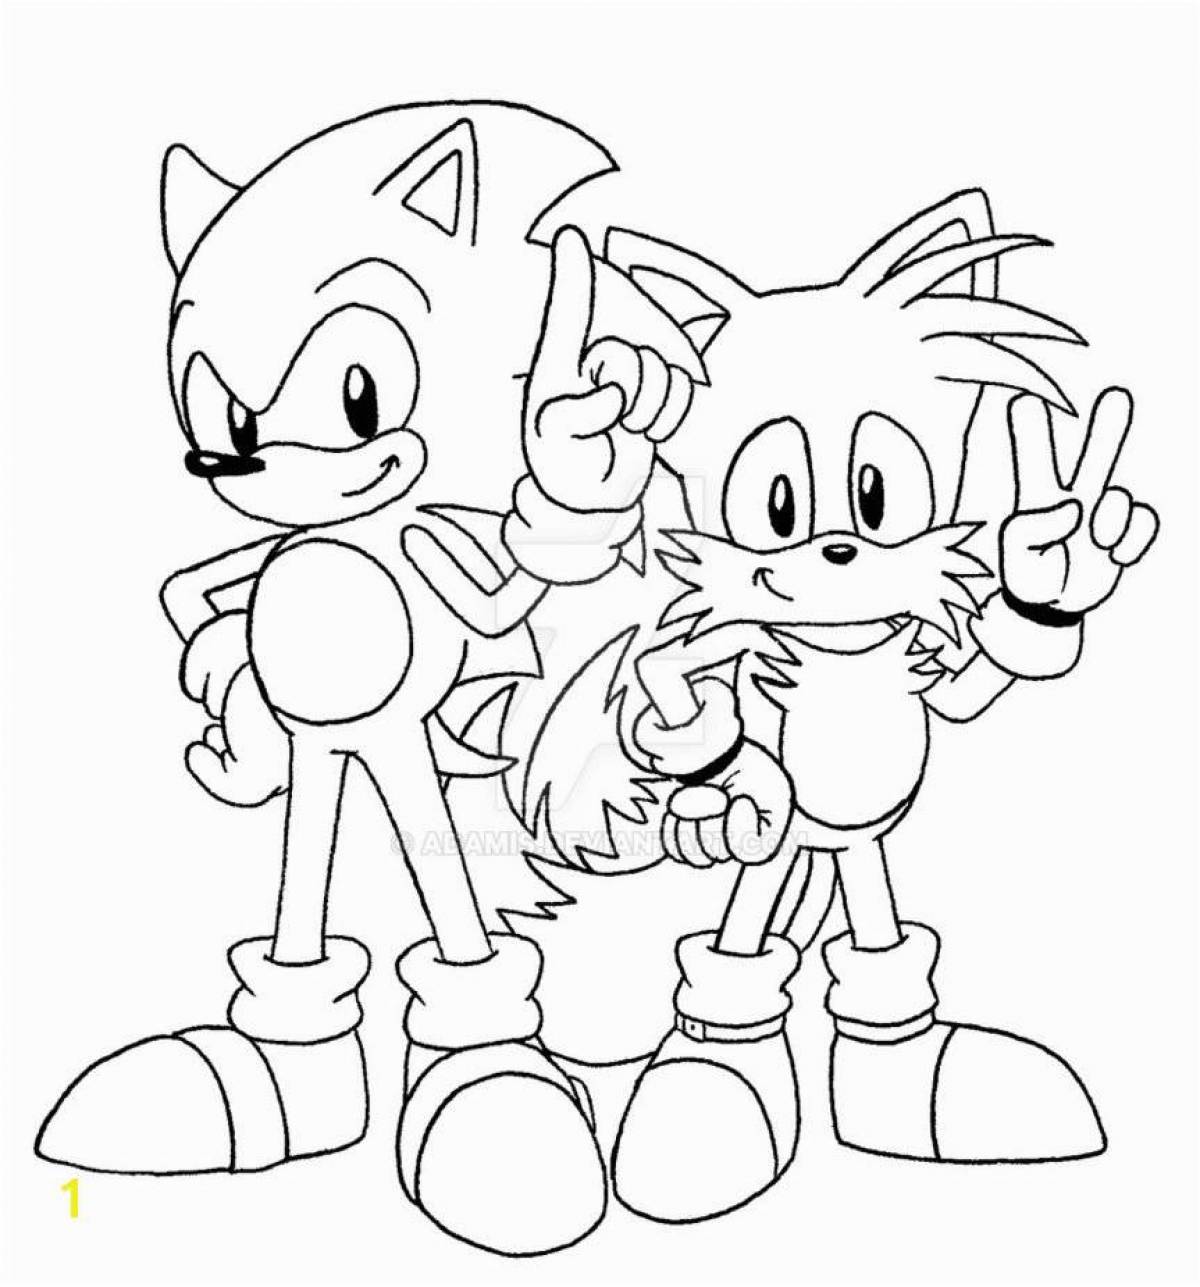 Comic sonic and his friends